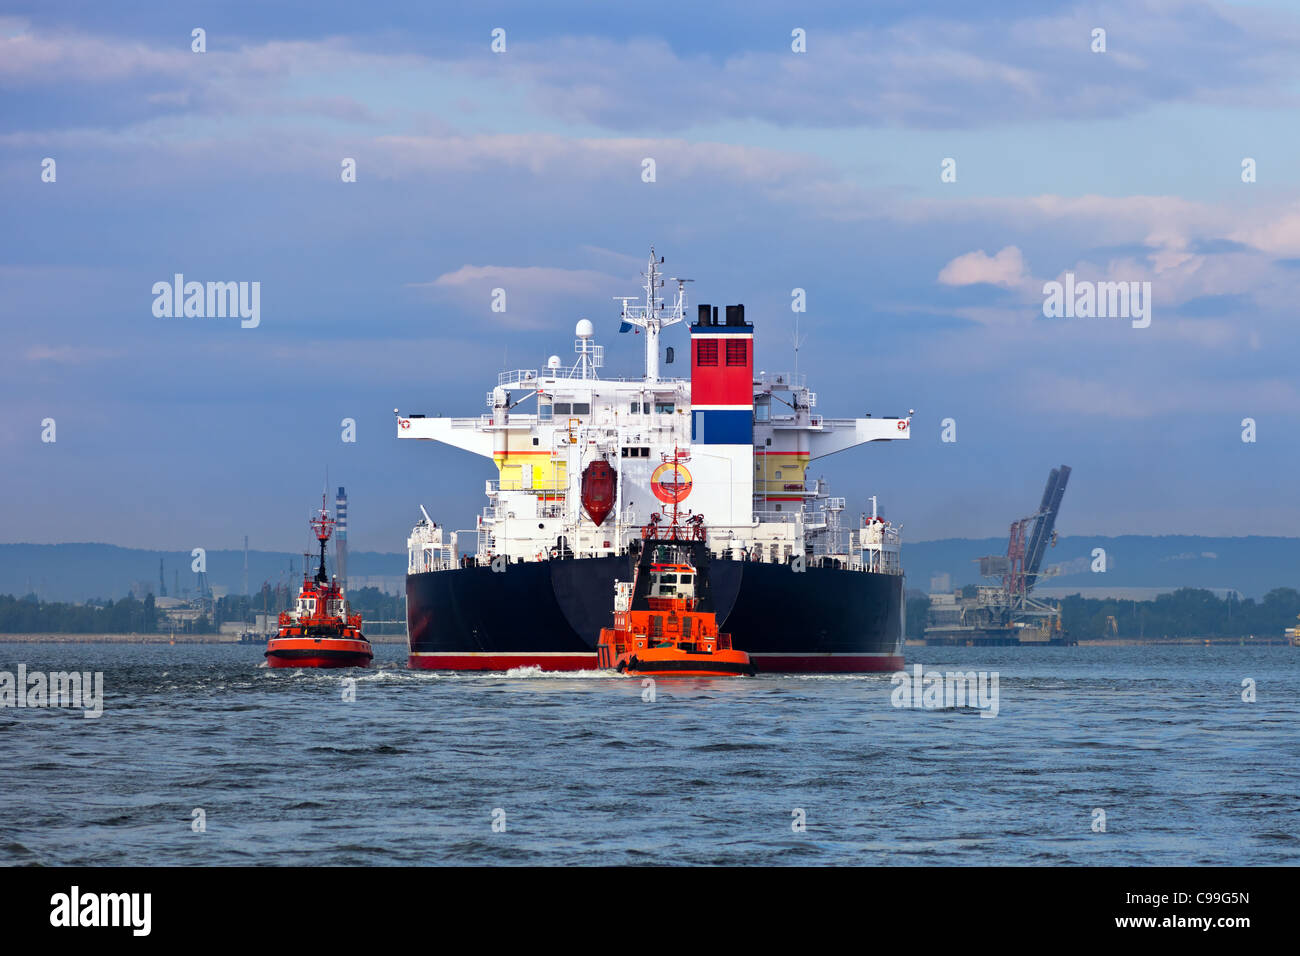 Maneuvers at sea on a cloudy day - Escorting tanker by tugs. Stock Photo